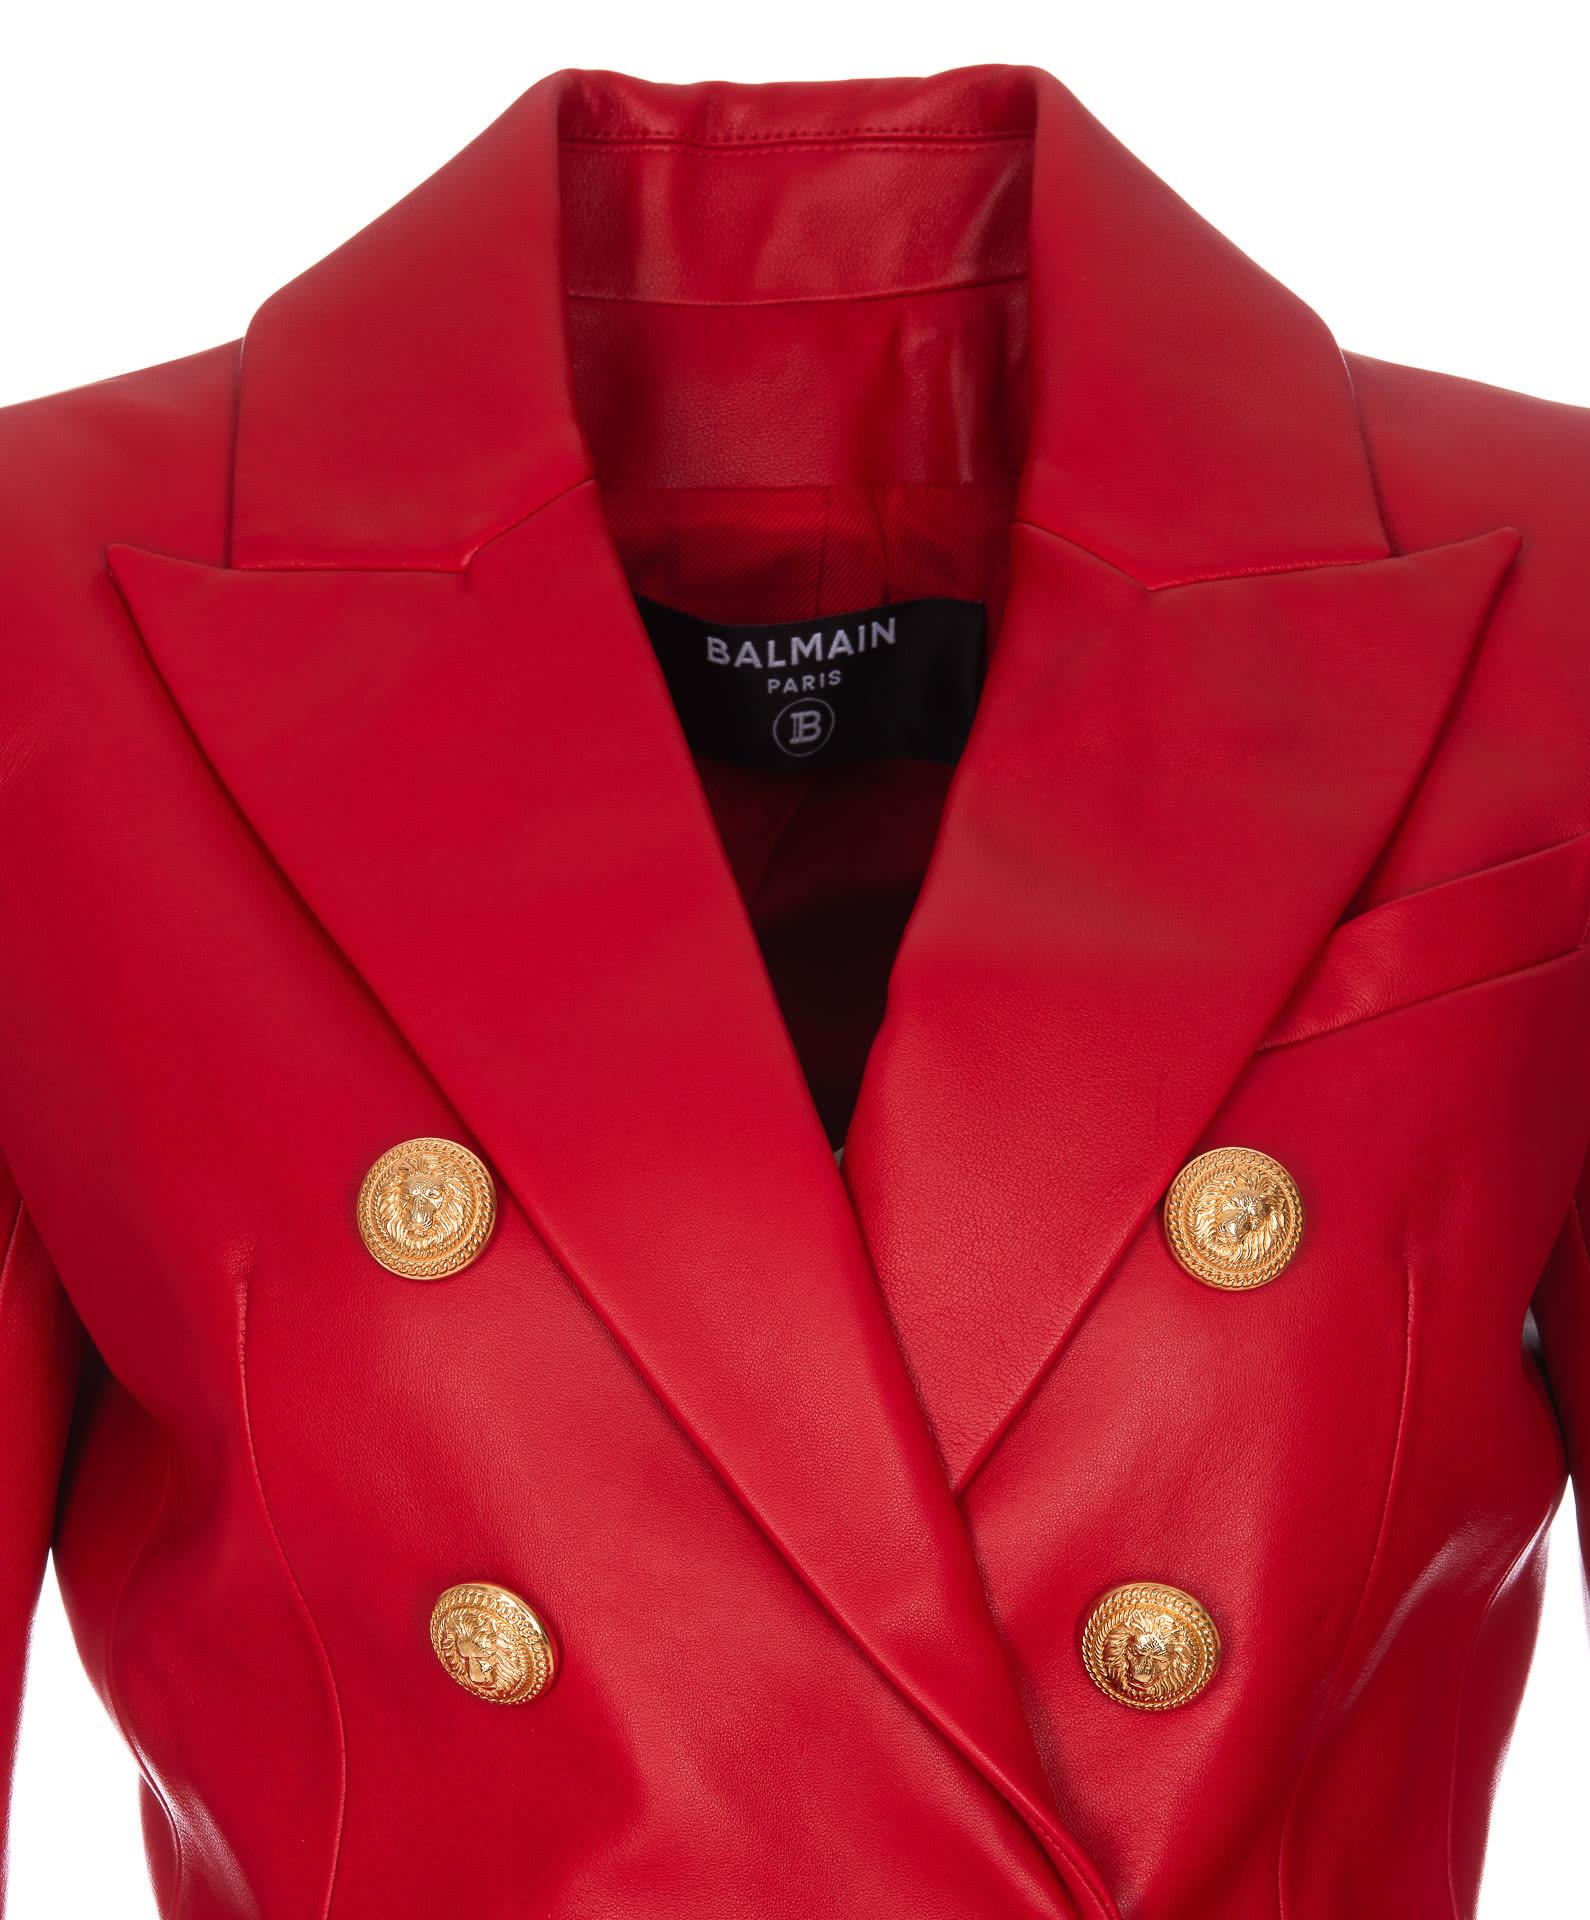 Balmain Jacket 6 Buttons in Red | Lyst